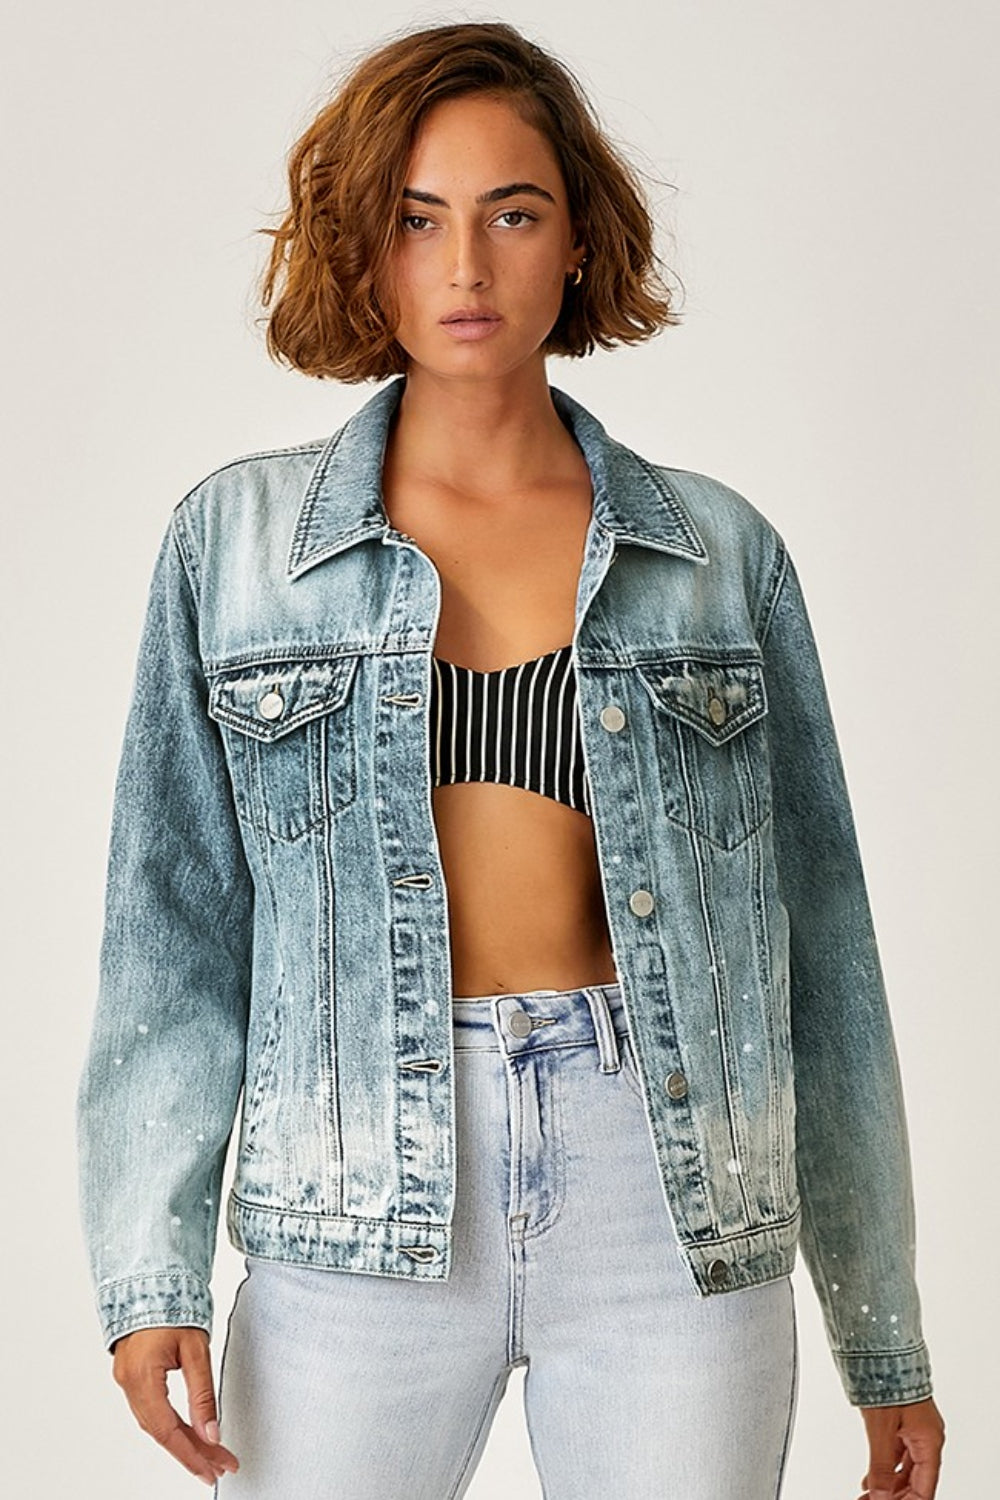 RISEN Ombre Washed Jean Jacket - Inspired Eye Boutique